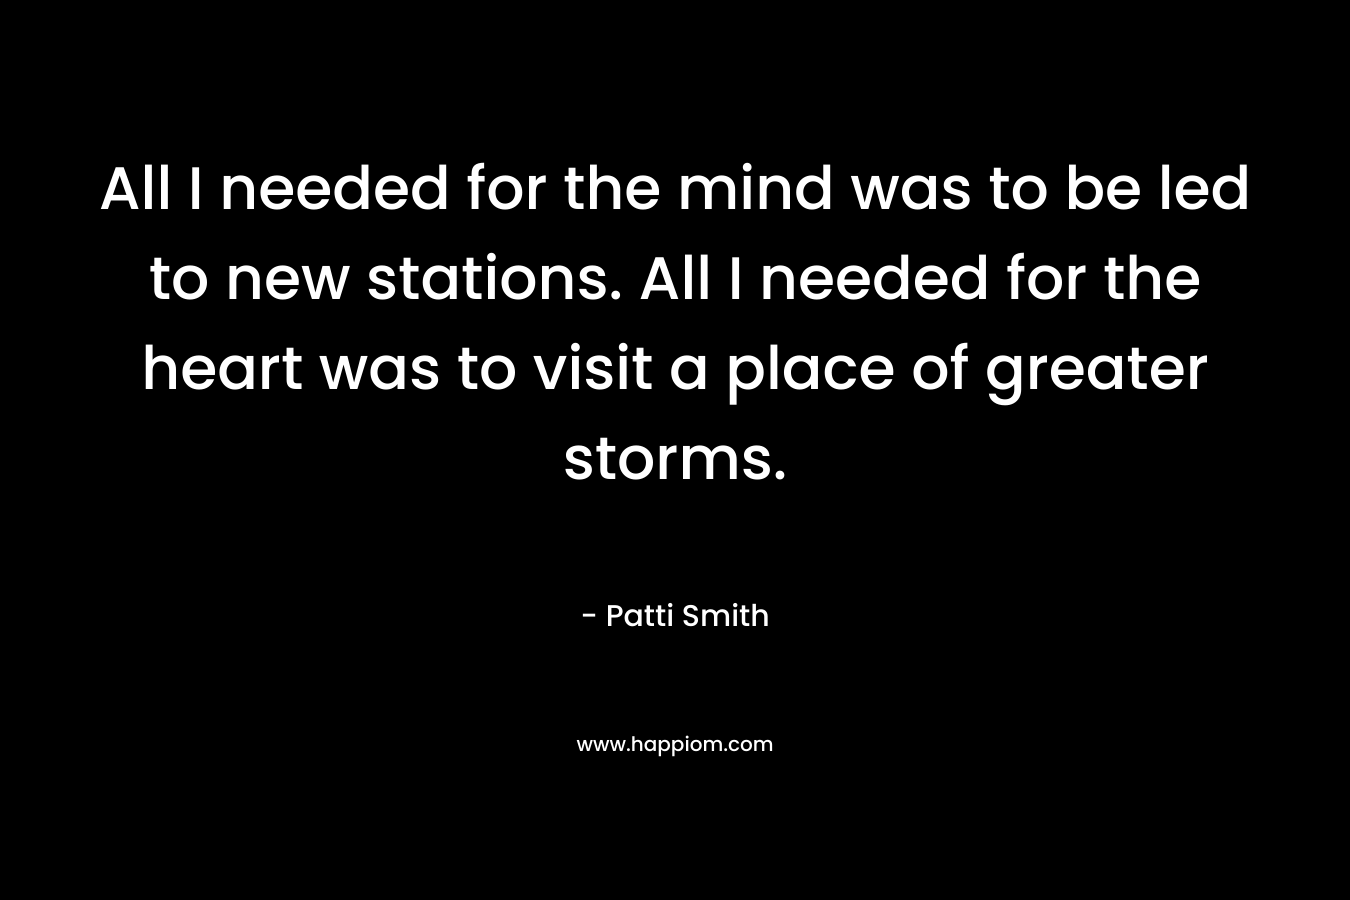 All I needed for the mind was to be led to new stations. All I needed for the heart was to visit a place of greater storms.